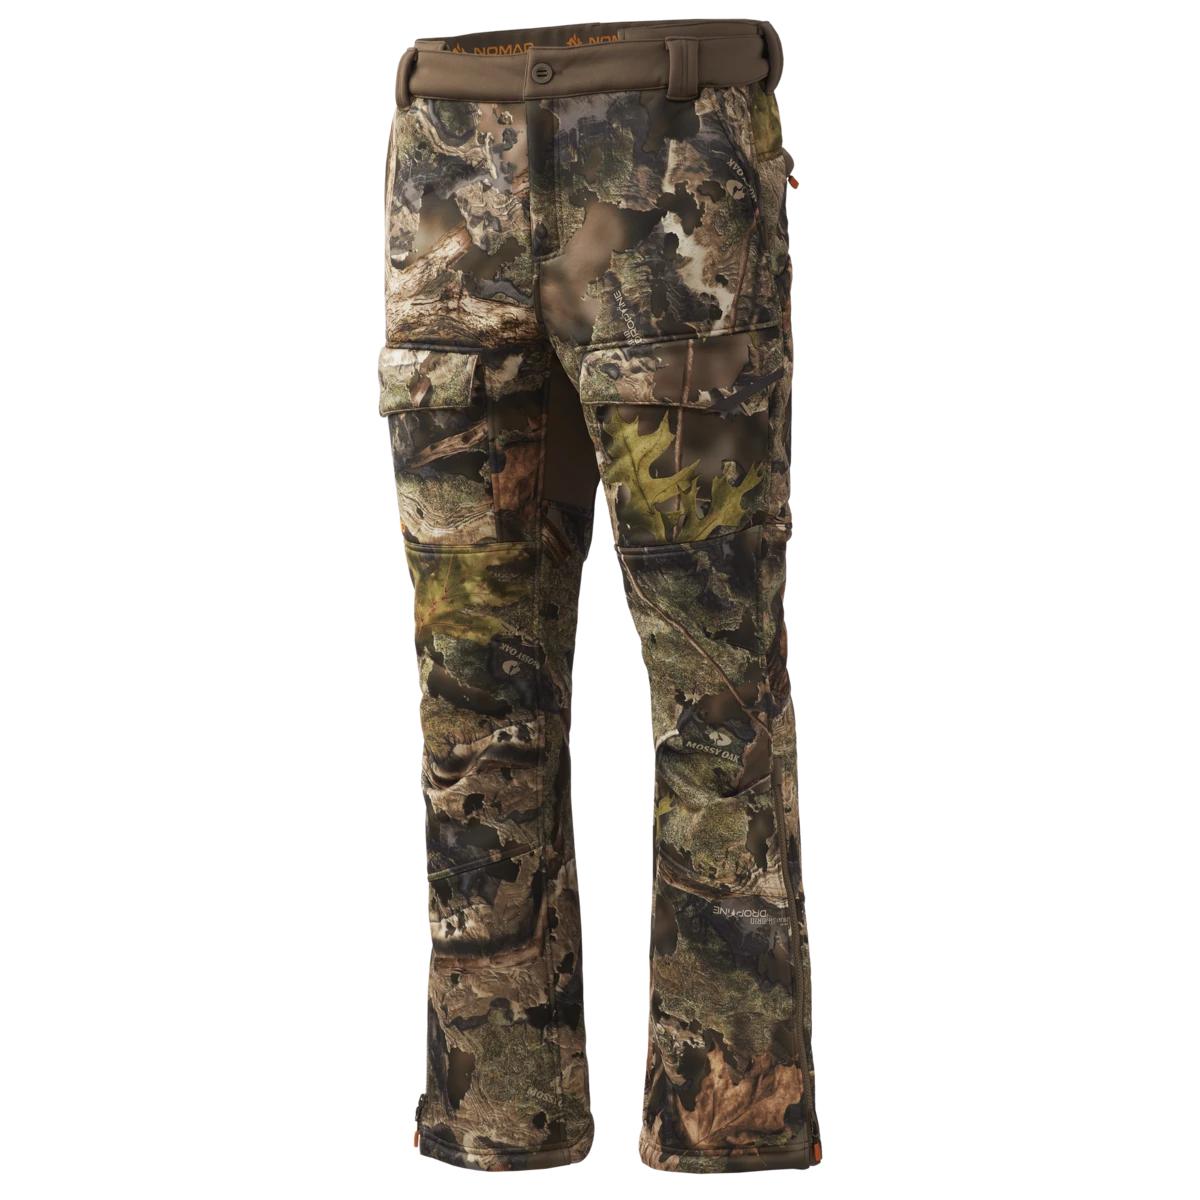 Nomad Harvester NXT Pant-HUNTING/OUTDOORS-Droptine-S-Kevin's Fine Outdoor Gear & Apparel